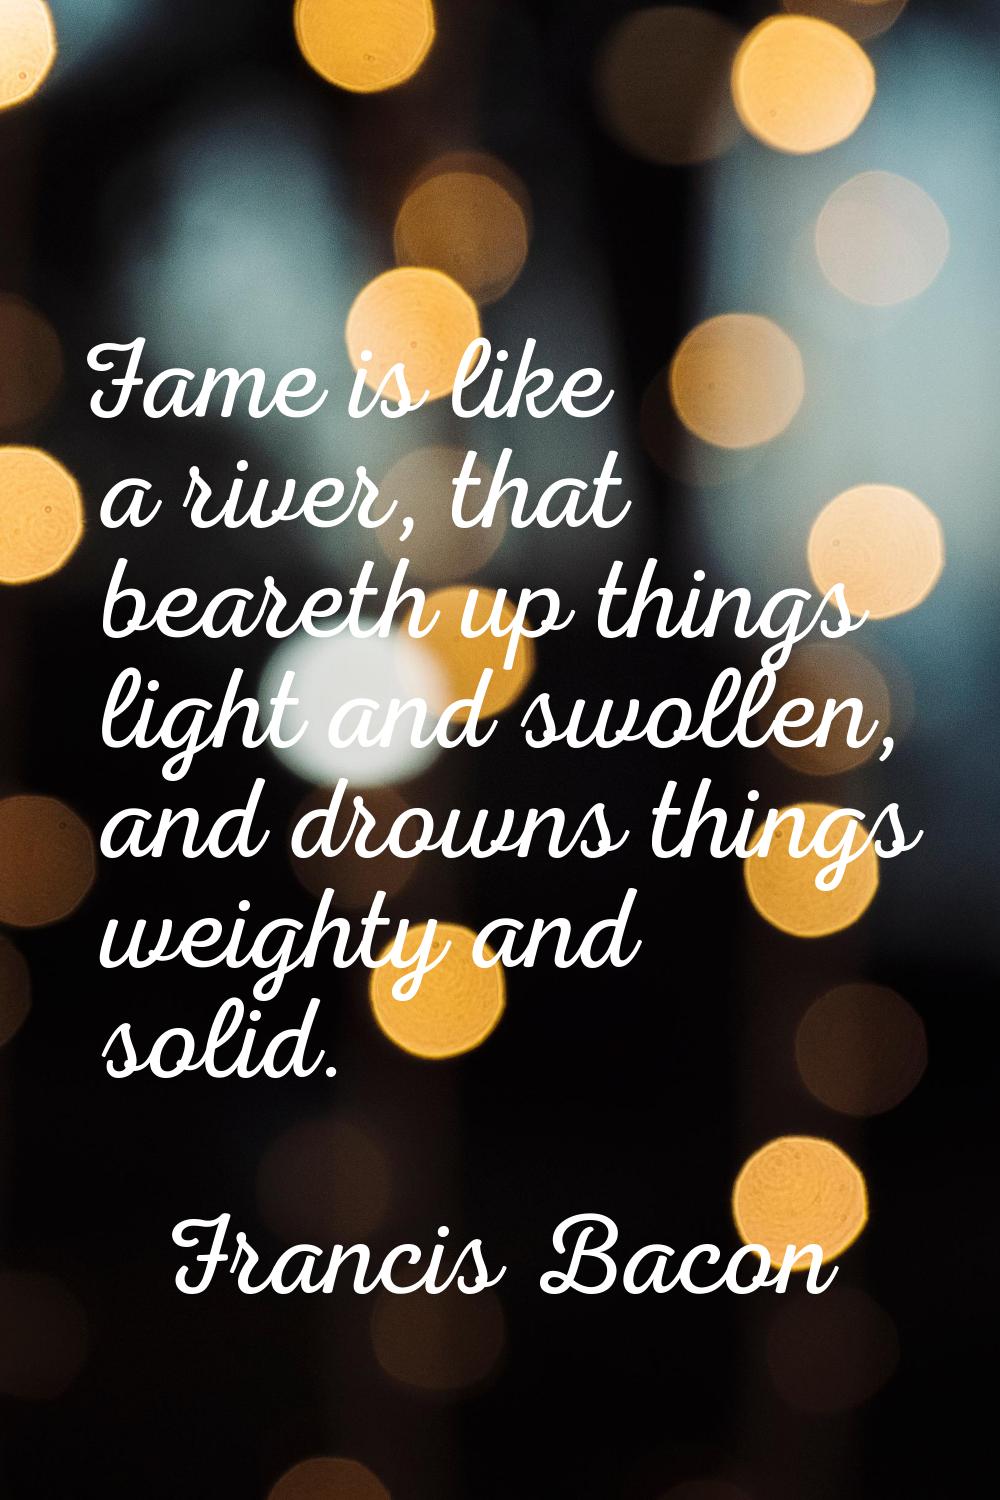 Fame is like a river, that beareth up things light and swollen, and drowns things weighty and solid